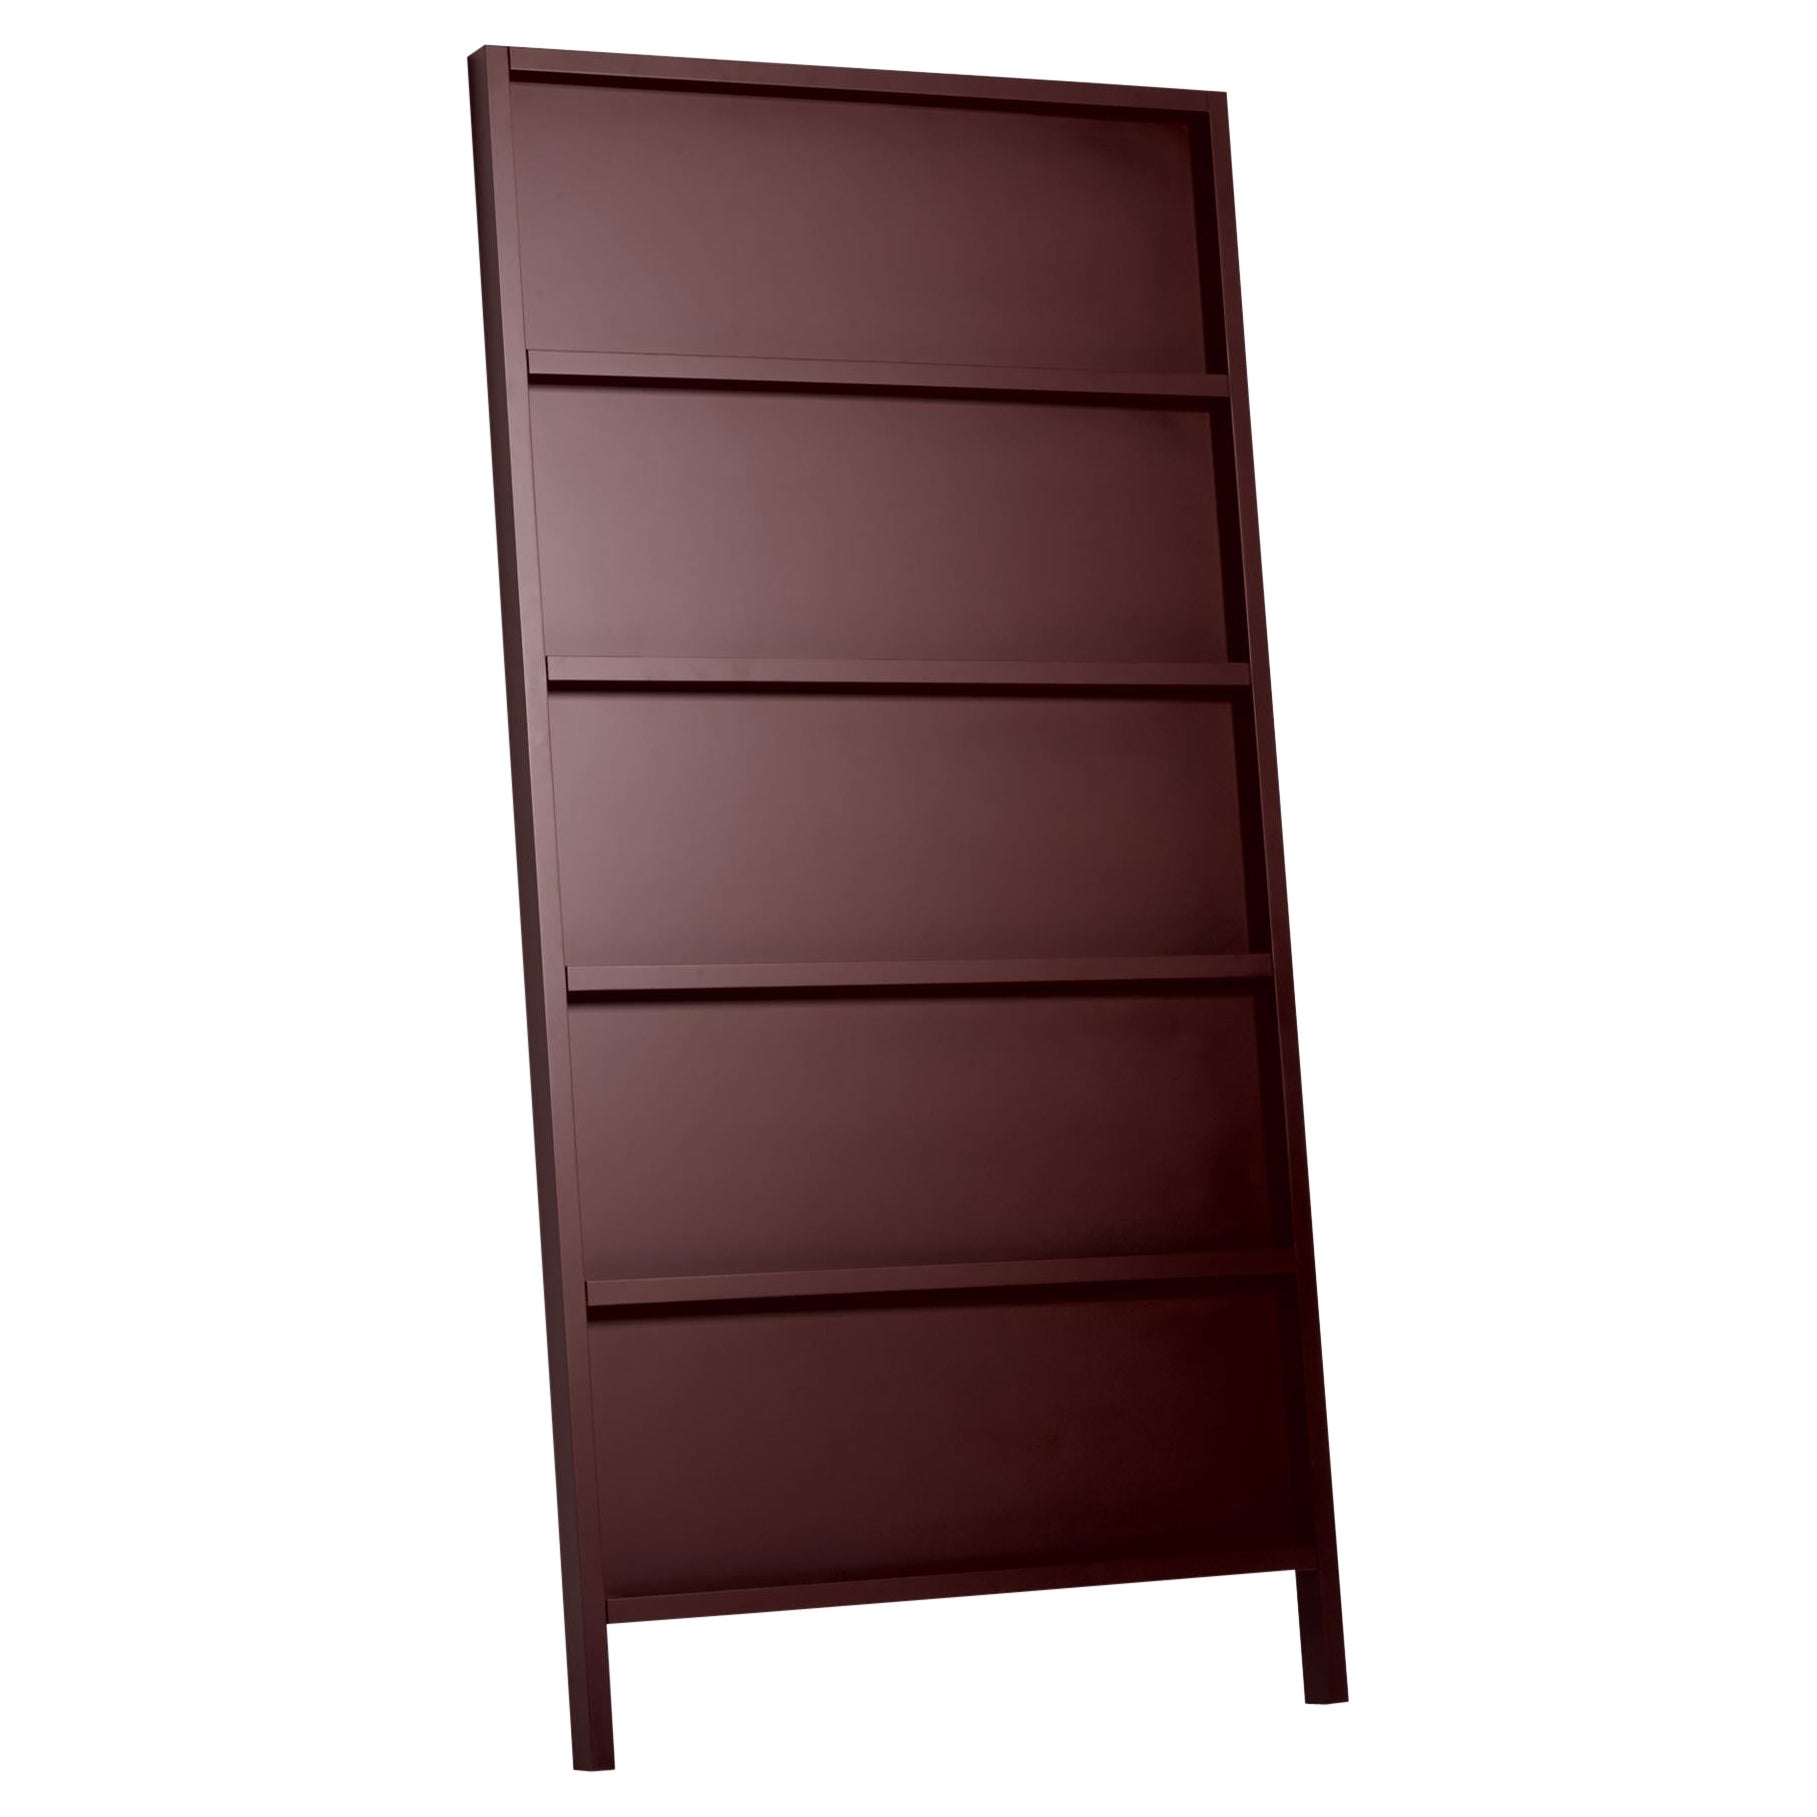 Moooi Oblique Small Cupboard/Wall Shelf in Sepia Brown Lacquered Beech